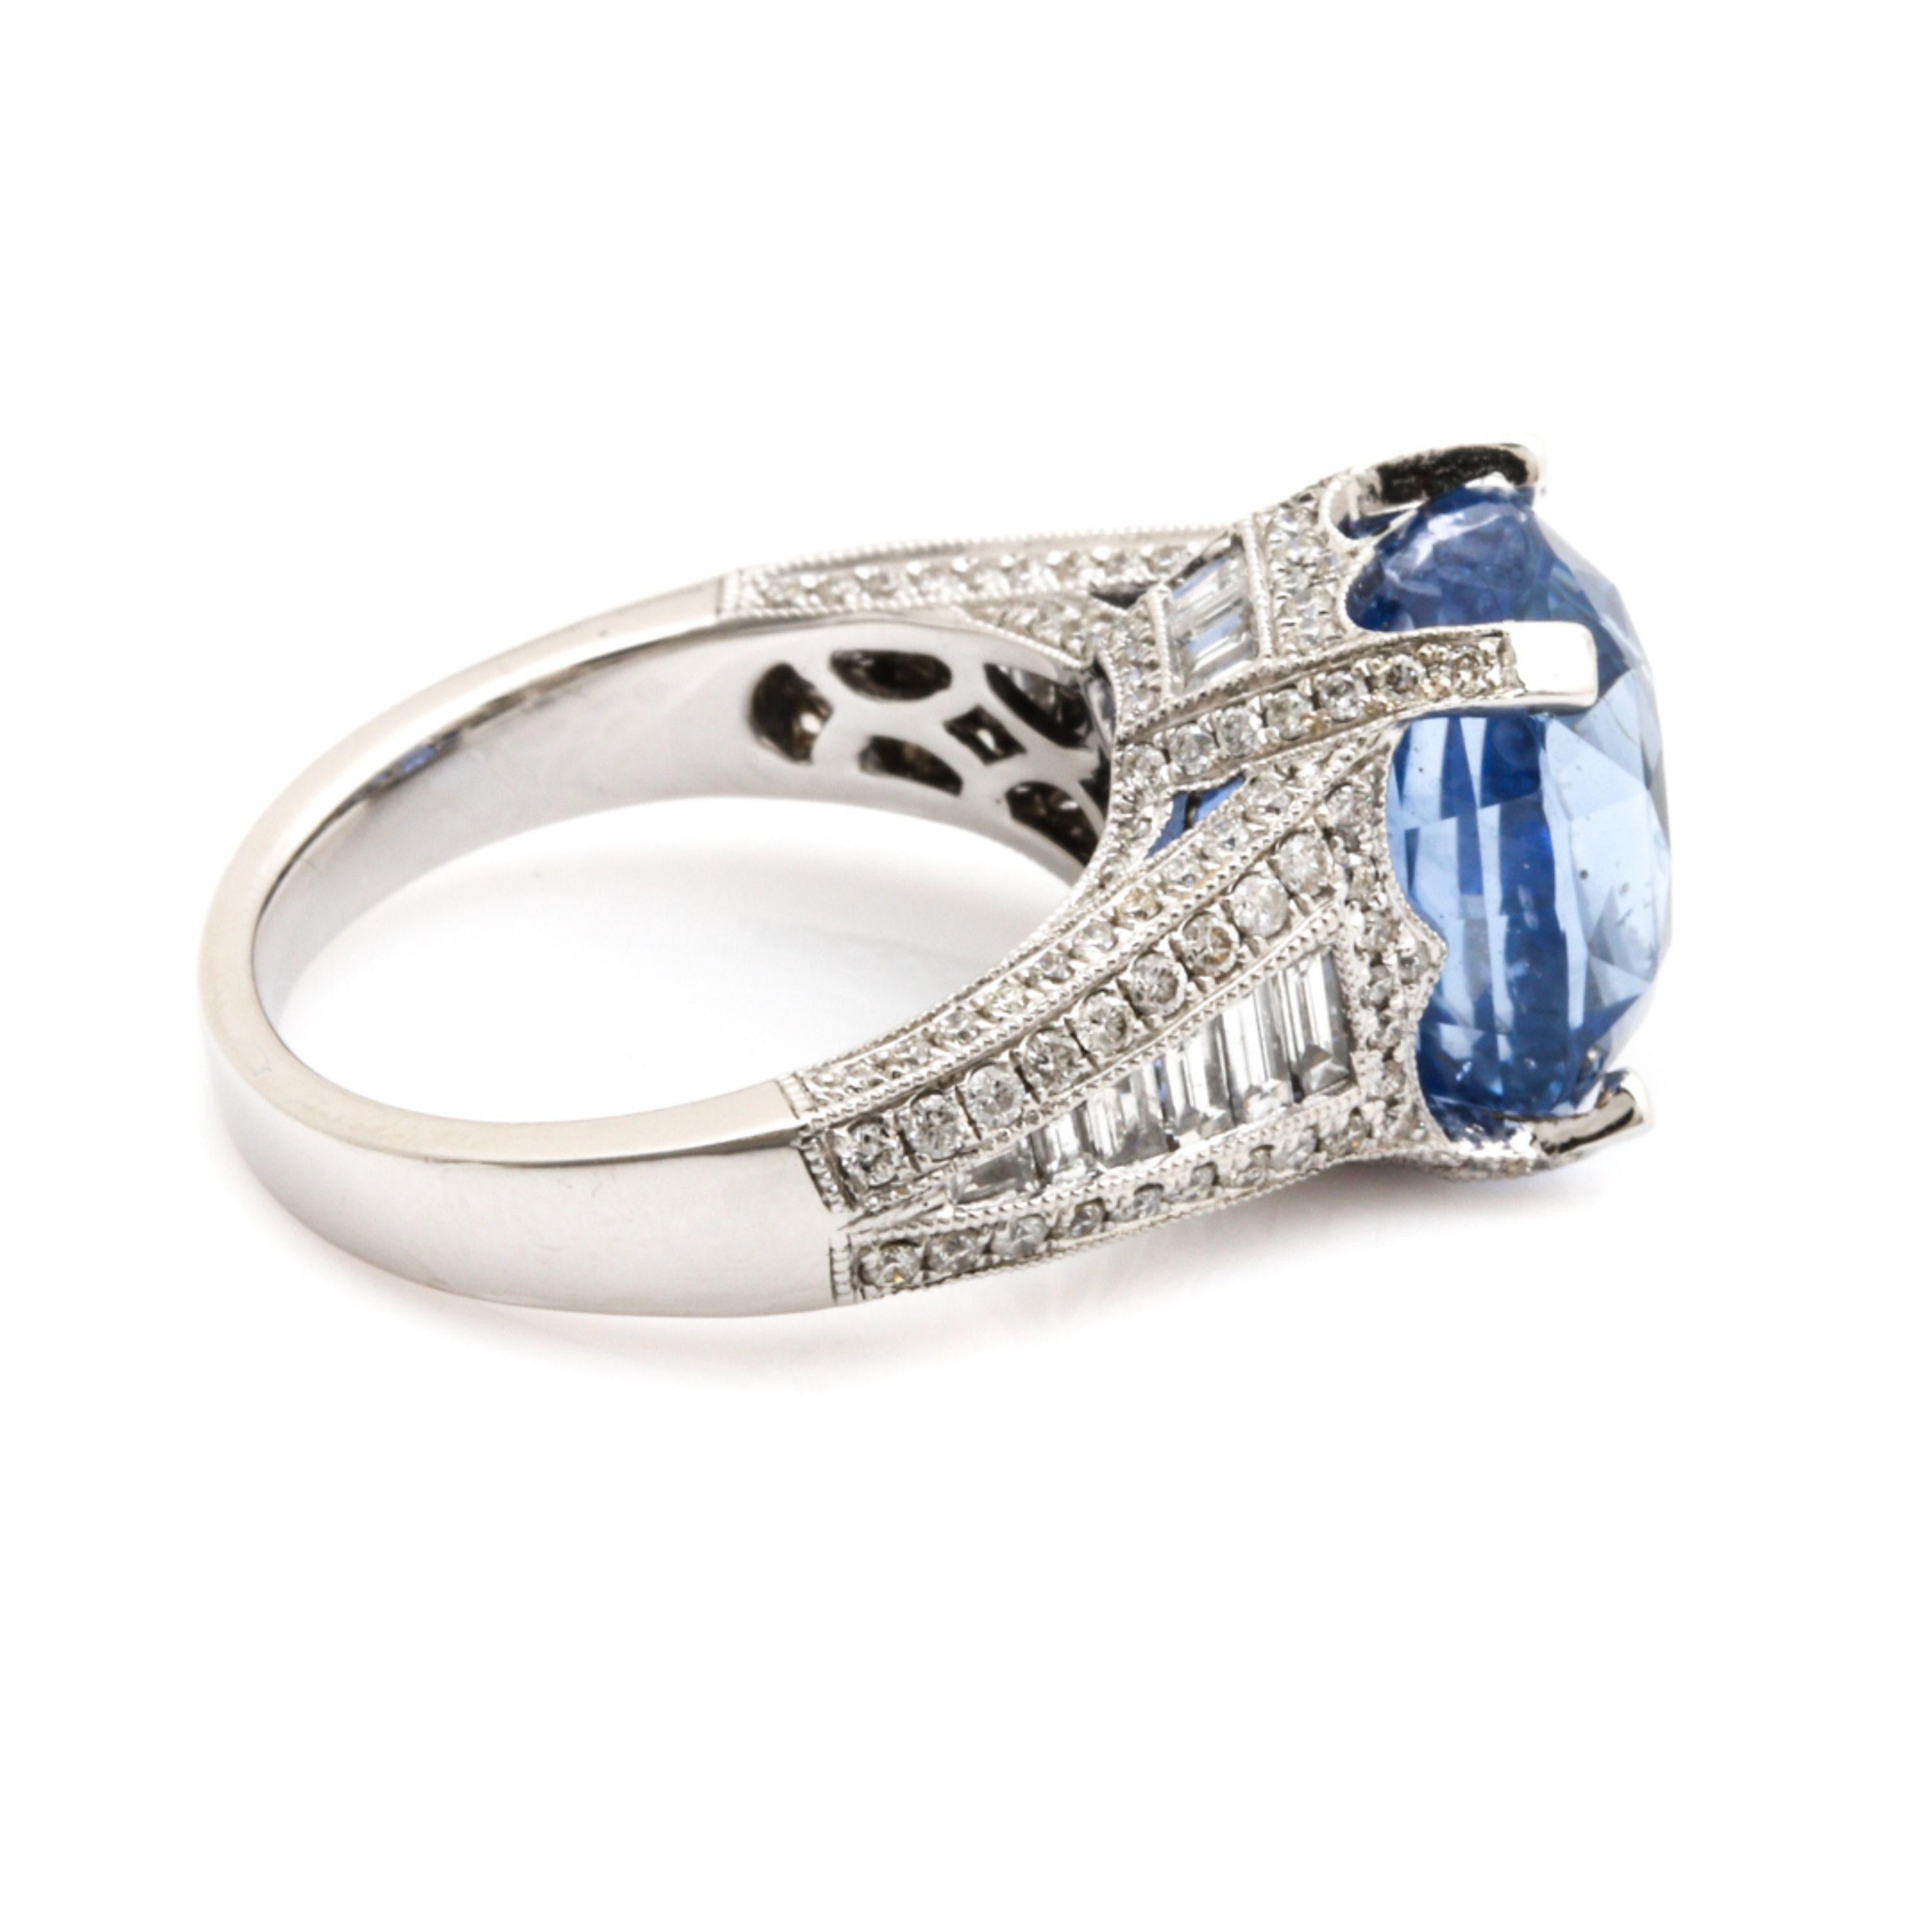 For Sale:  7 Carat Natural Sapphire Diamond Engagement Ring Set in 18K Gold, Cocktail Ring 3